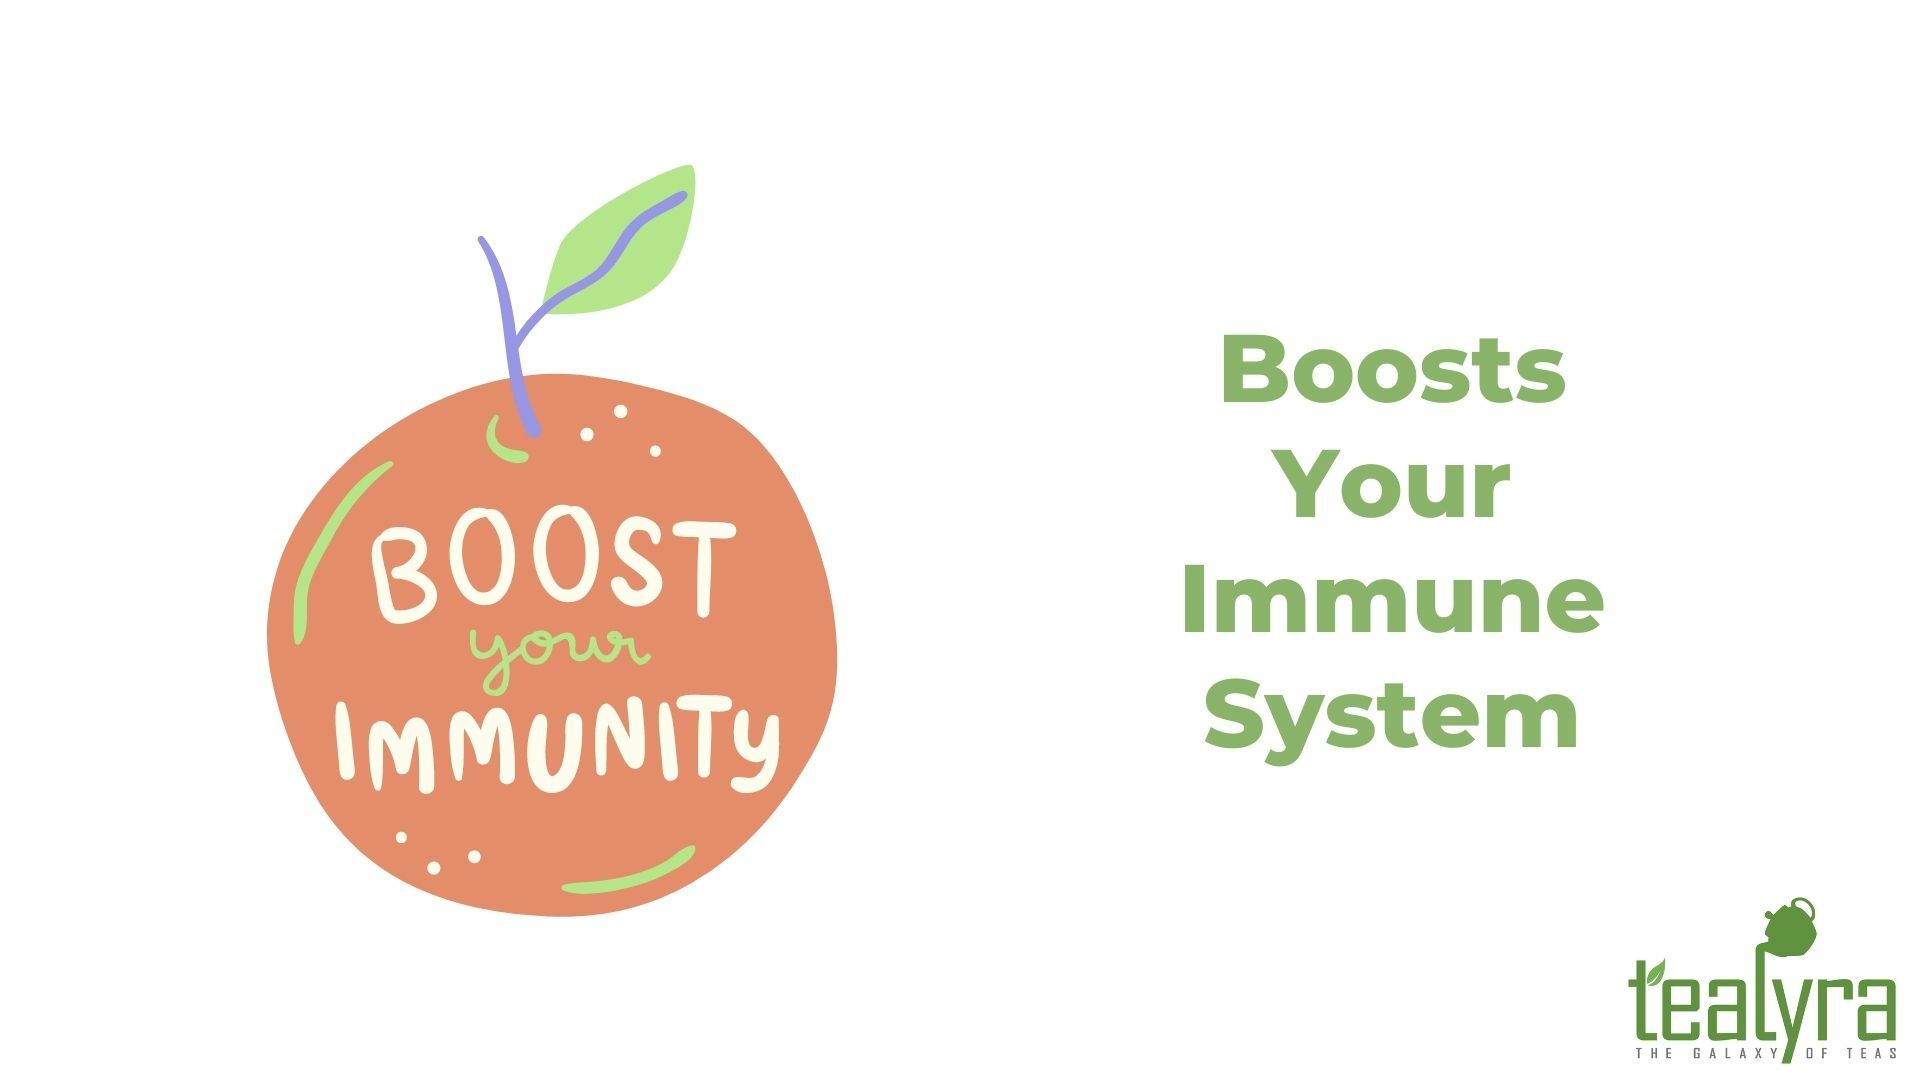 image-Boosts-Your-Immune-System